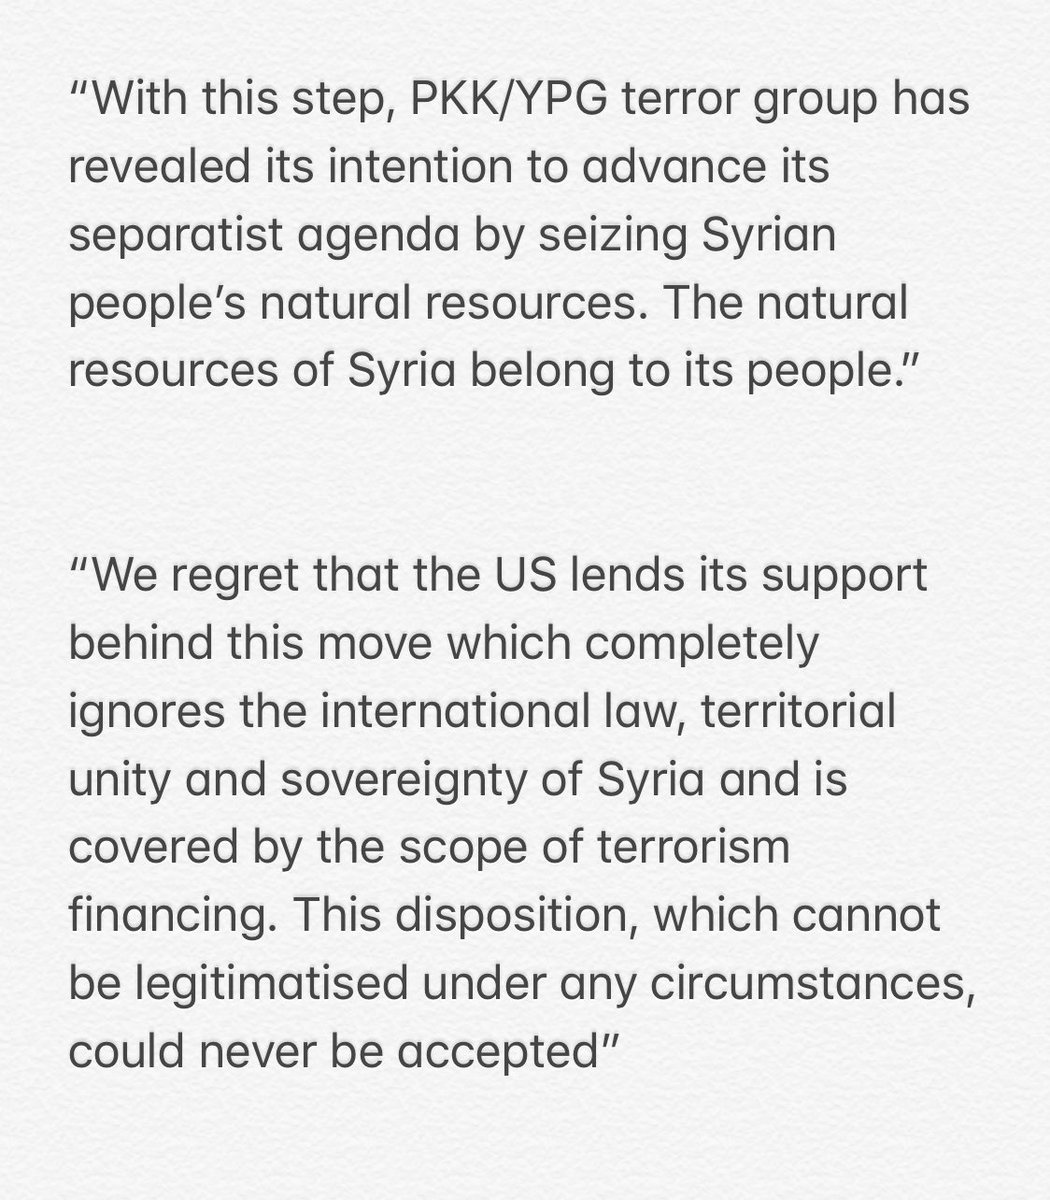 One of the greatest concerns might be Turkey’s reaction to the US - SDF oil deal. One of the key disagreements between Turkey and the US on Syria has been about the latter’s local cooperation with the SDF.